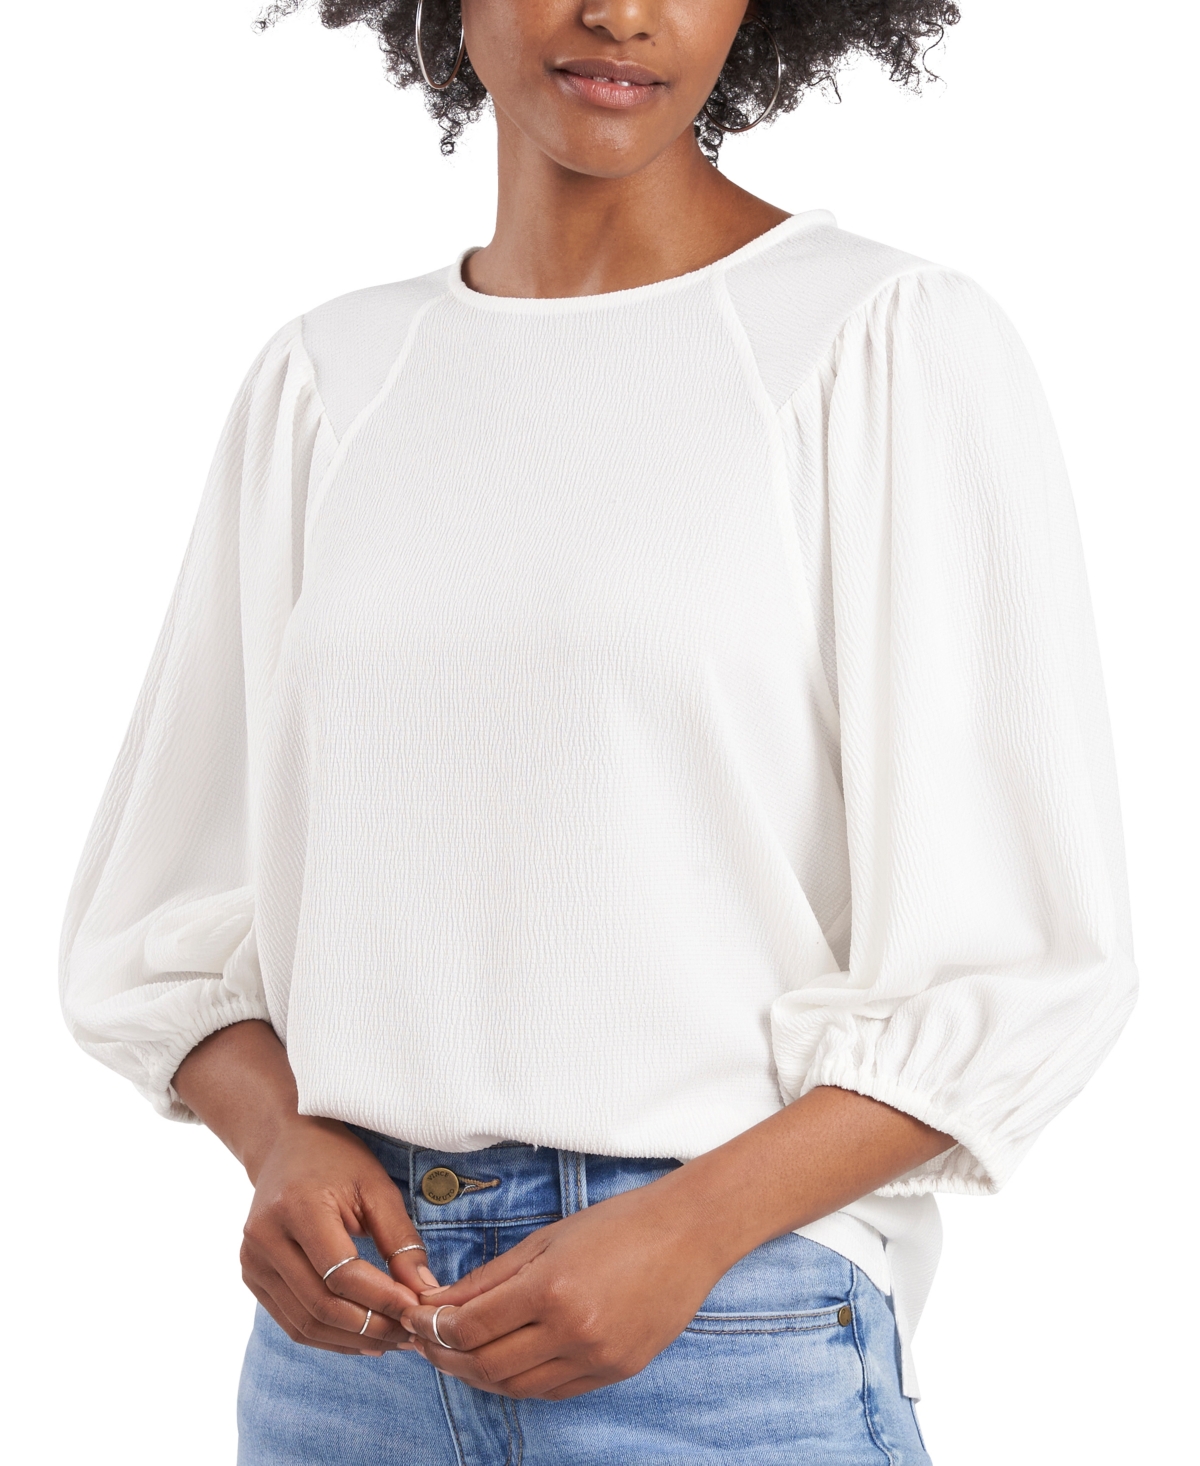 VINCE CAMUTO WOMEN'S PUFF SLEEVE KNIT TOP